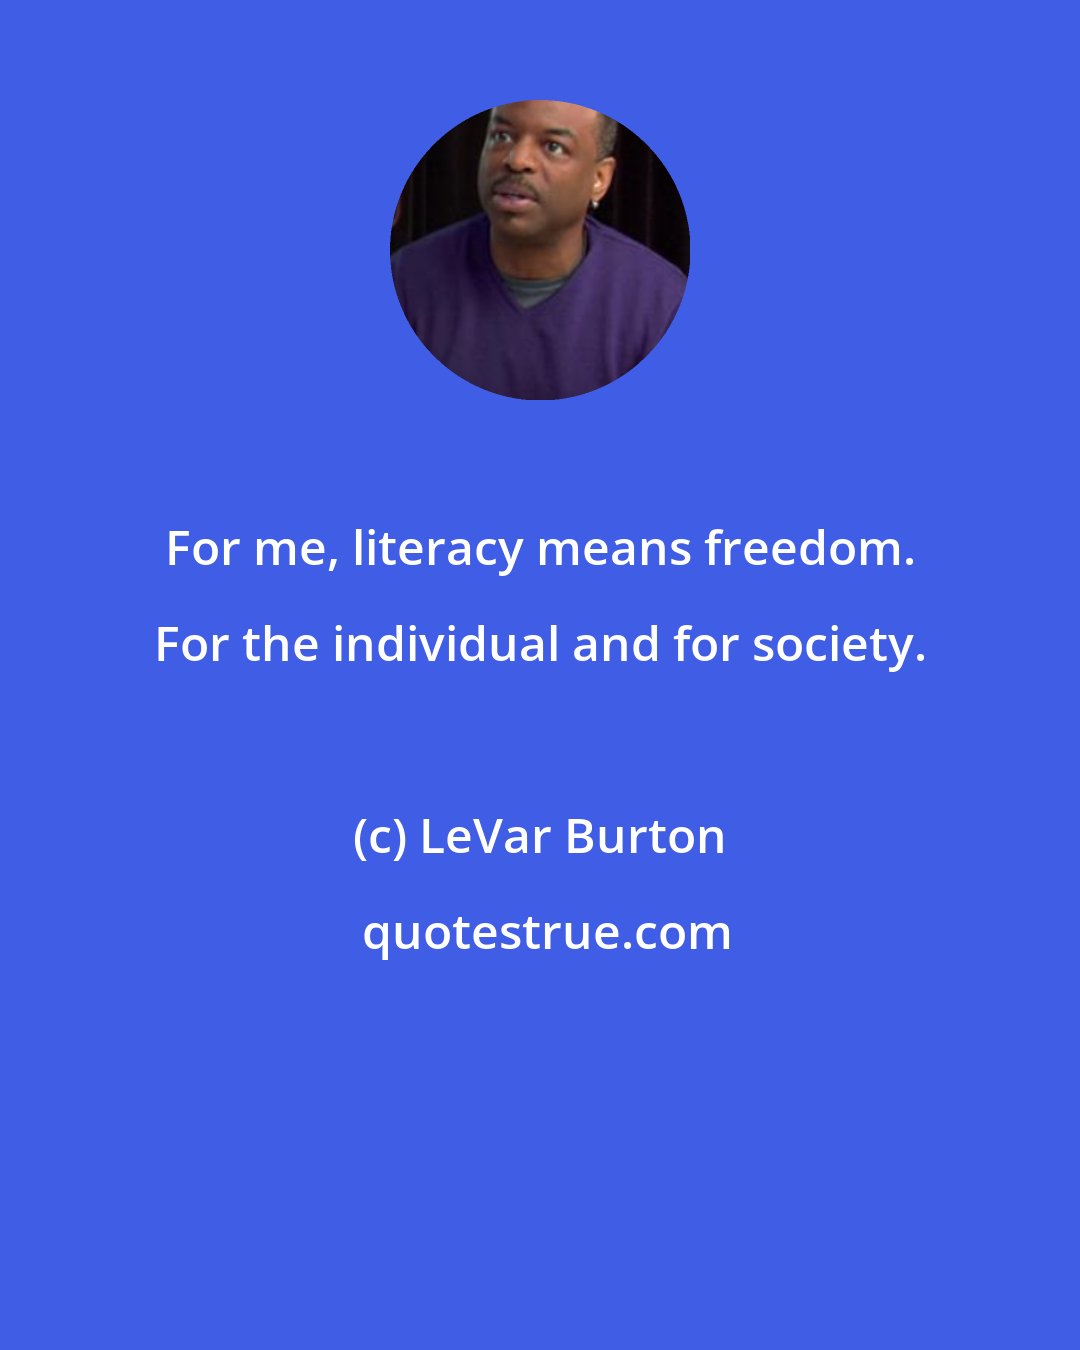 LeVar Burton: For me, literacy means freedom. For the individual and for society.